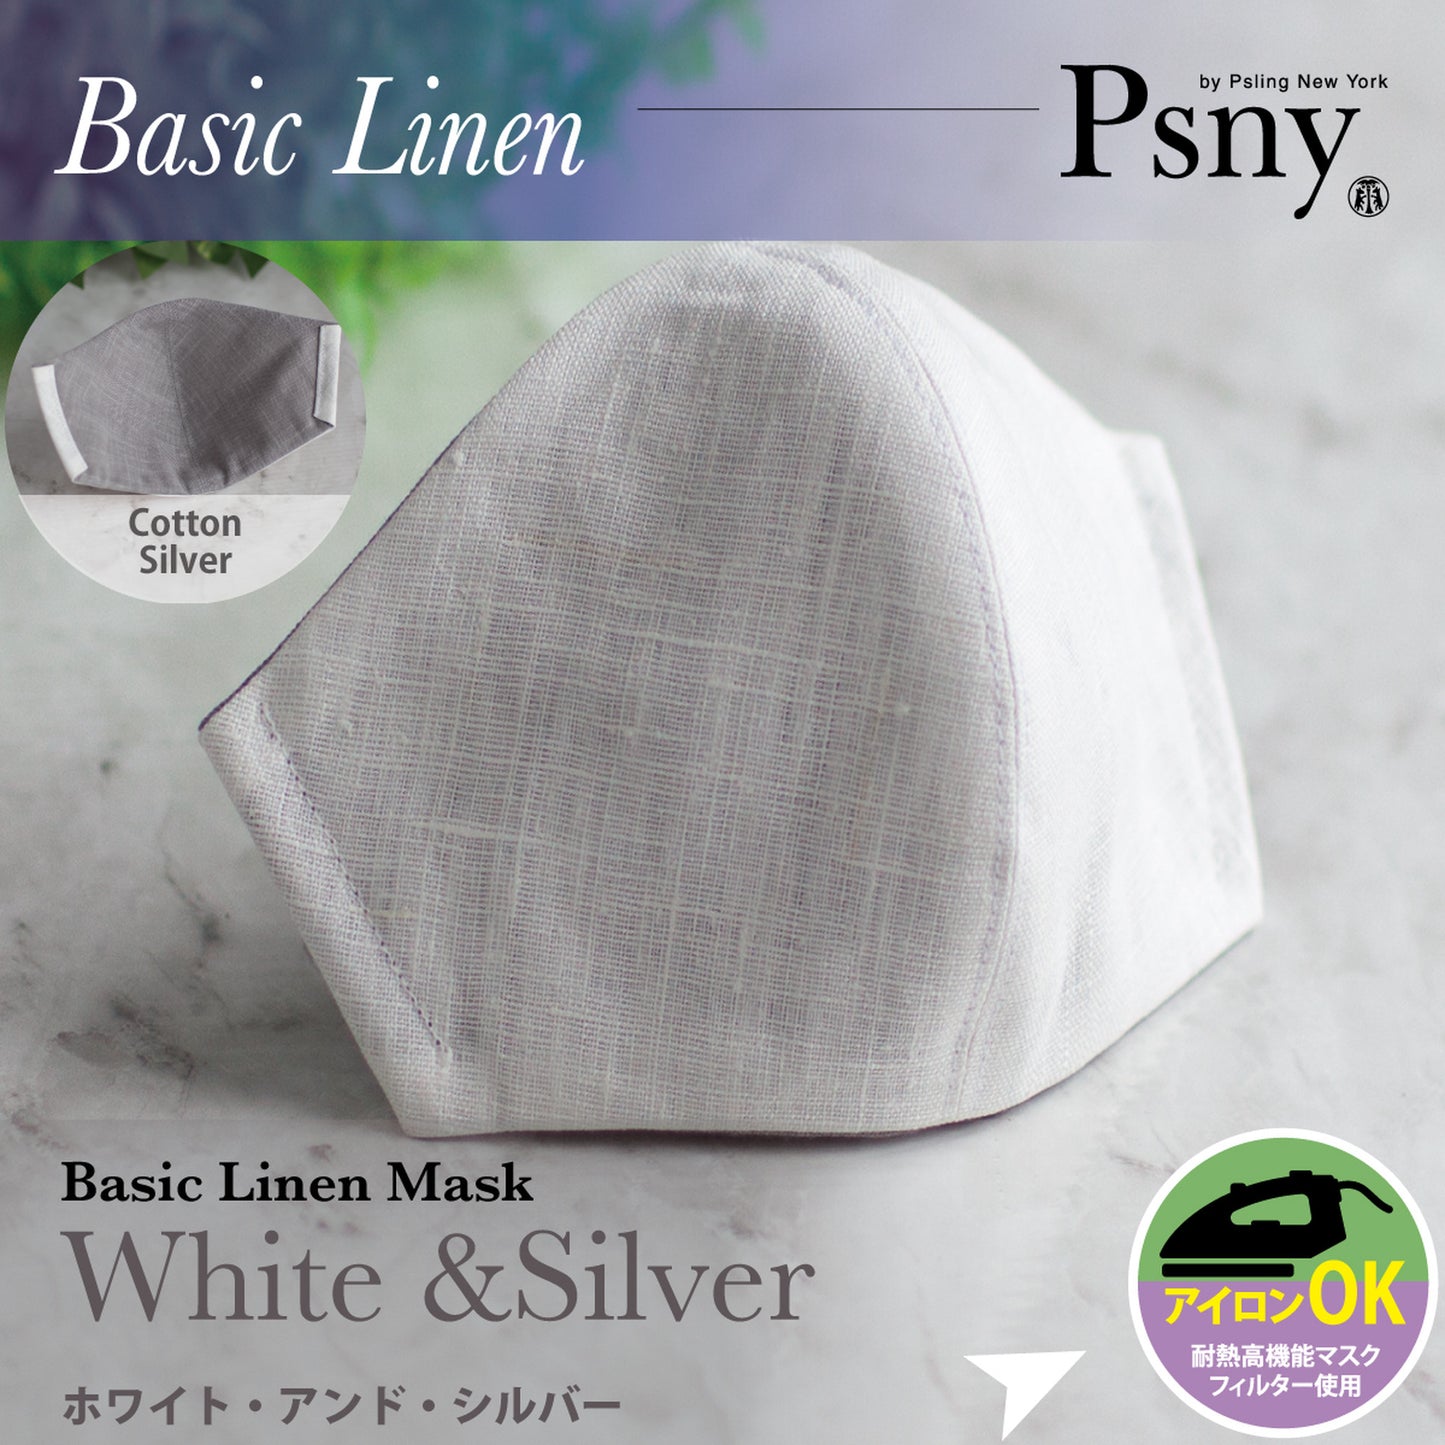 PSNY free shipping basic linen/white &amp; silver hemp elegant ceremonial occasion clean beautiful elegant commuting high-class mask adult beauty pollen non-woven fabric filter three-dimensional adult mask -BL09